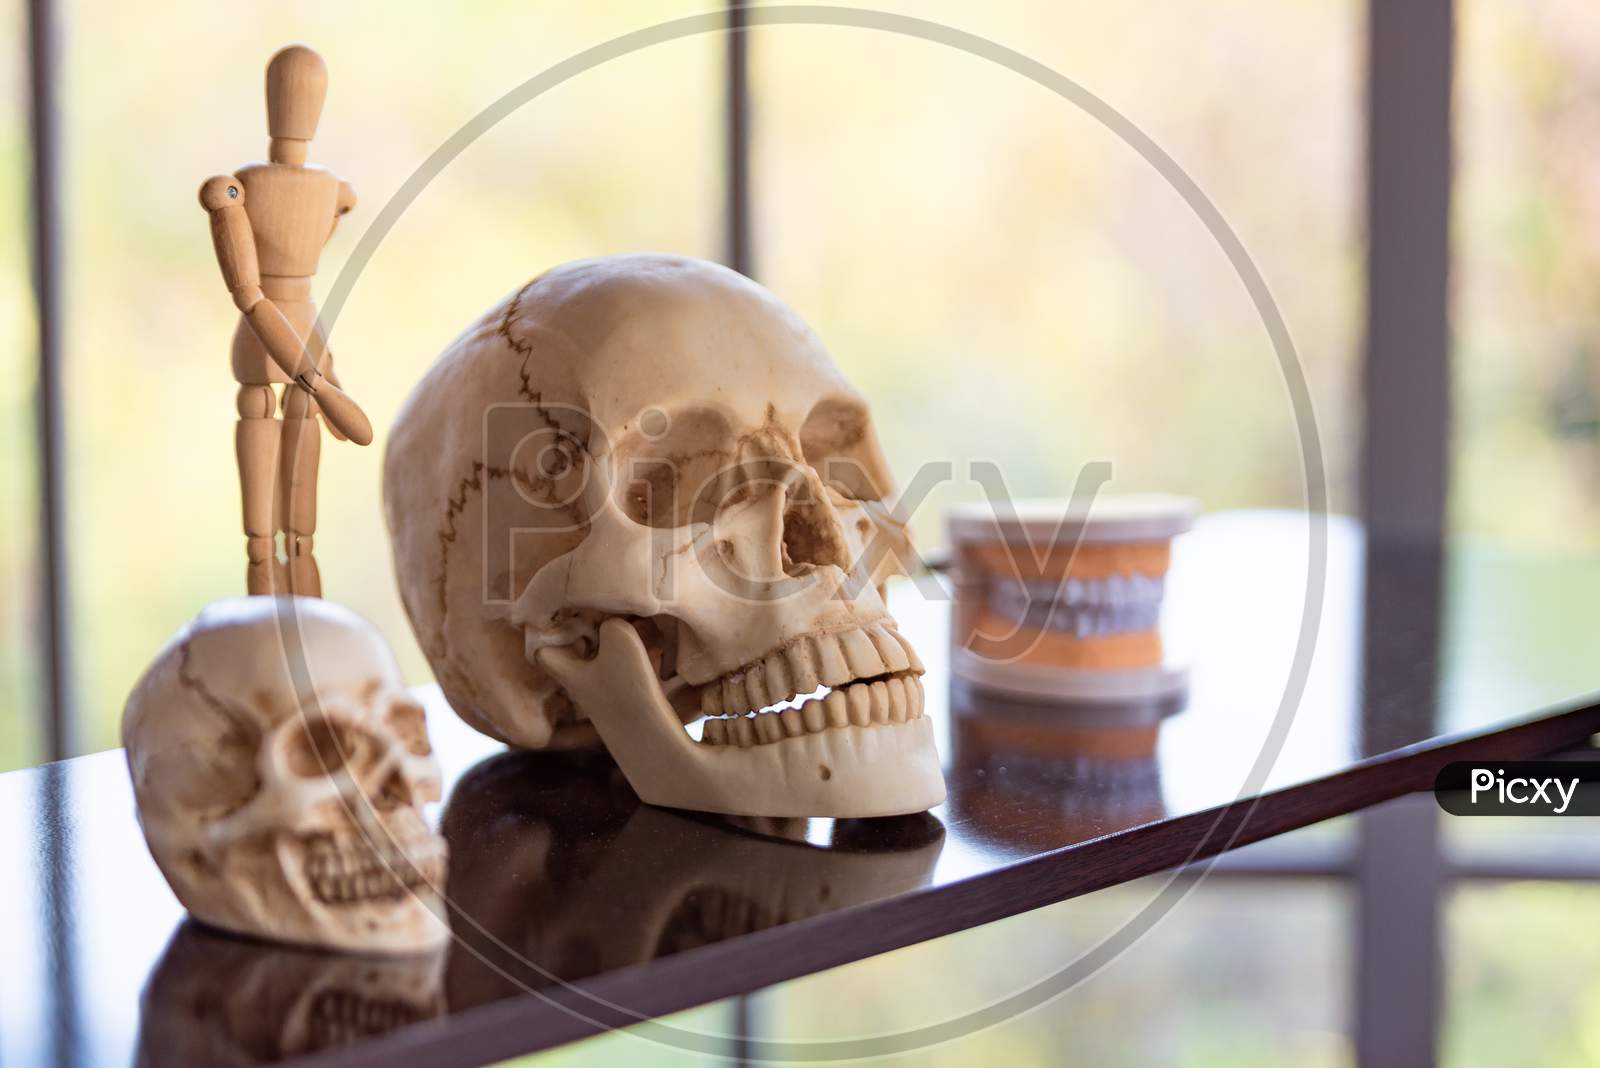 Skull Skeleton On Shelf In Laboratory Room At School. Science And Object Concept. Education And Anatomy Learning.